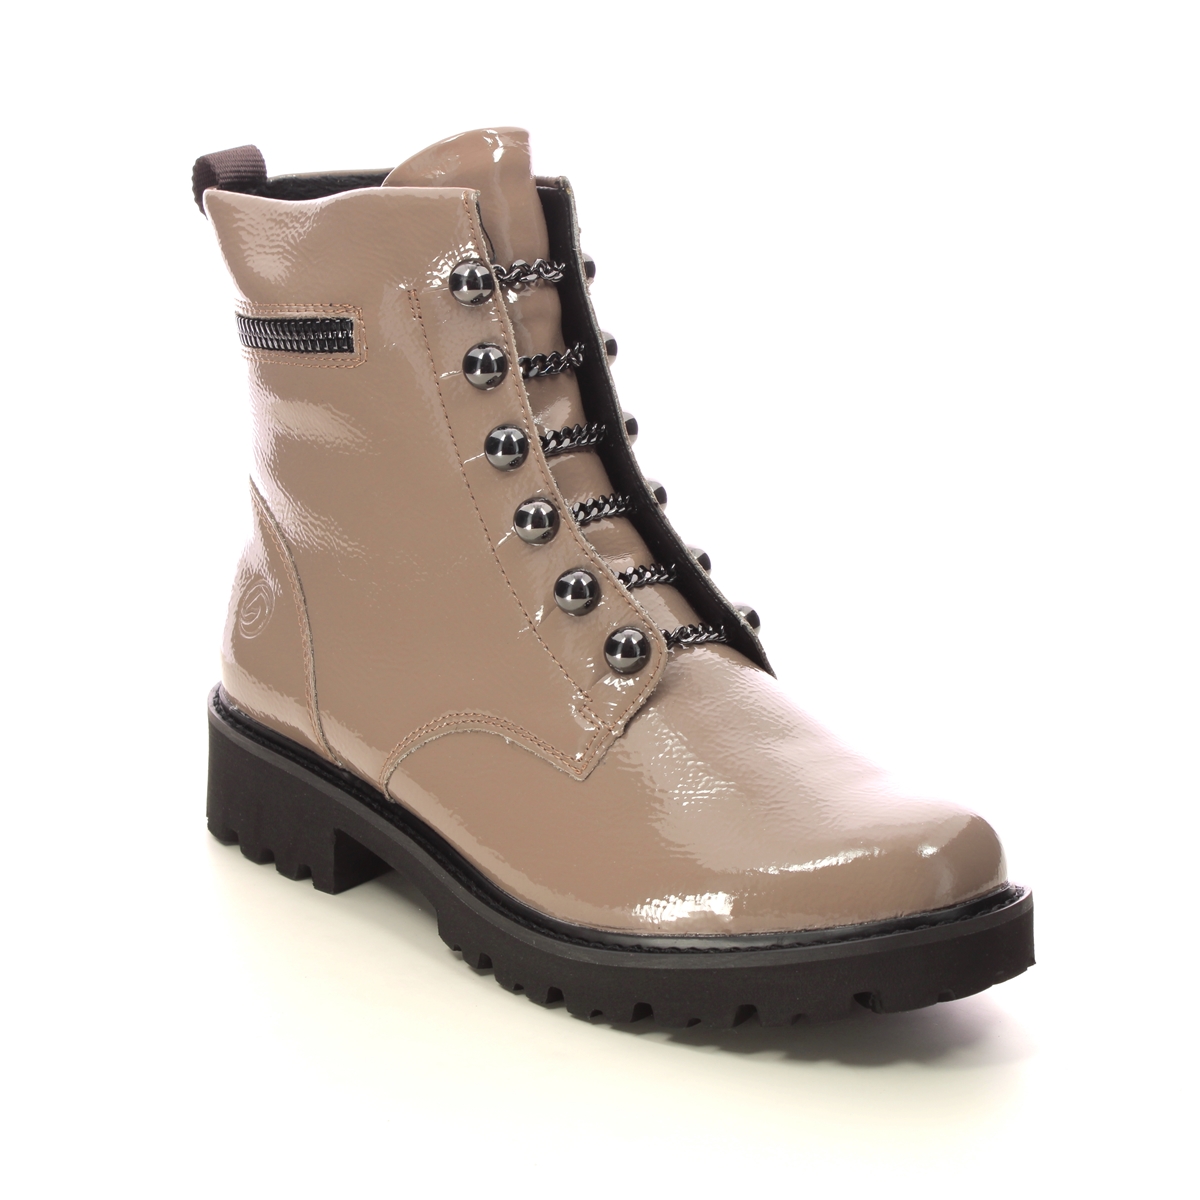 Remonte Docland Taupe Patent Womens Biker Boots D8670-20 In Size 36 In Plain Taupe Patent